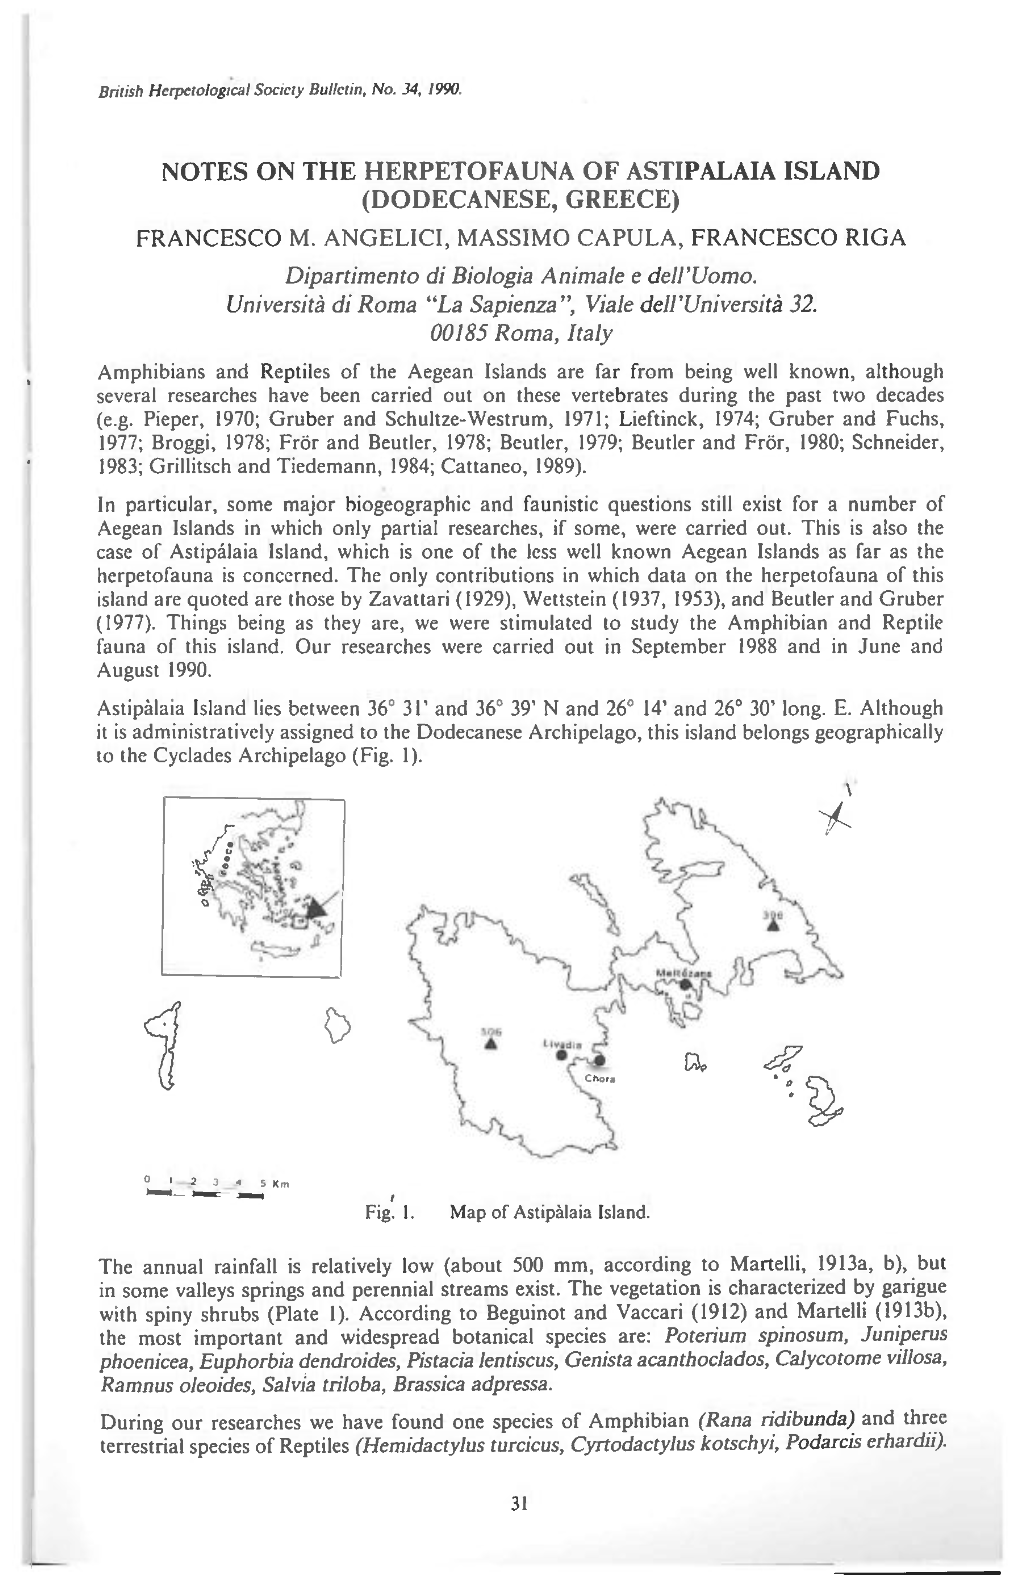 Notes on the Herpetofauna of Astipalaia Island (Dodecanese, Greece) Francesco M